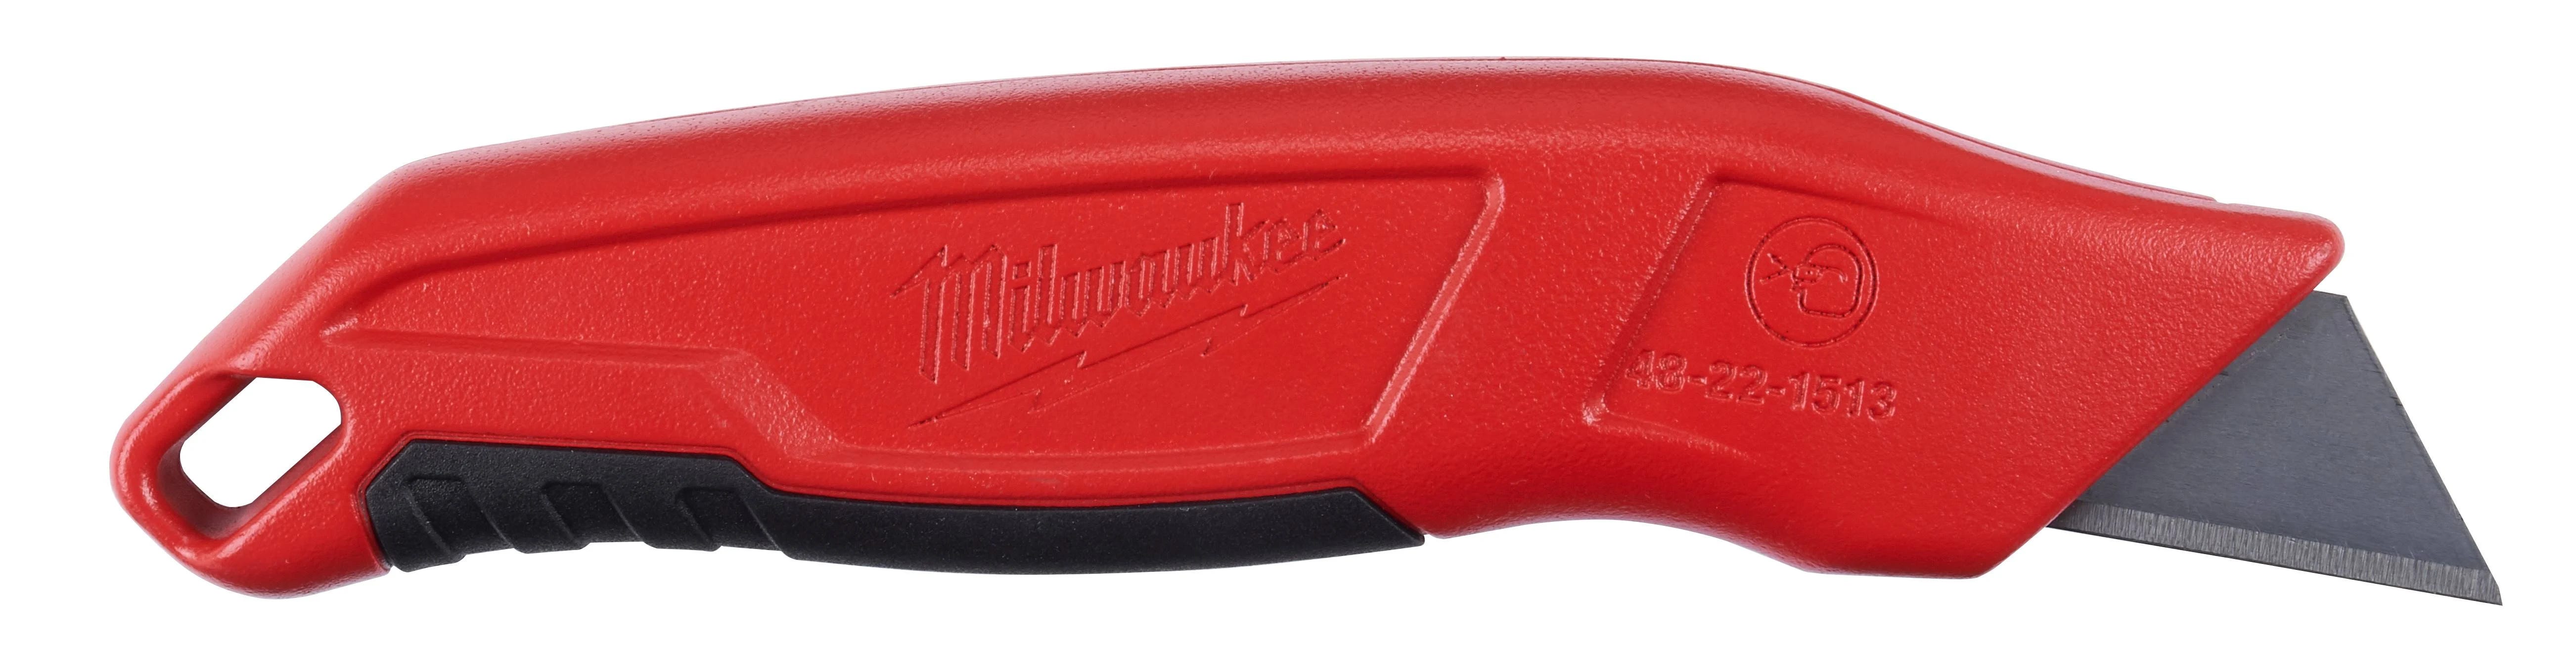 Milwaukee Fixed Blade Utility Knife with Overmold Grip and 5 Extra Blades | Image